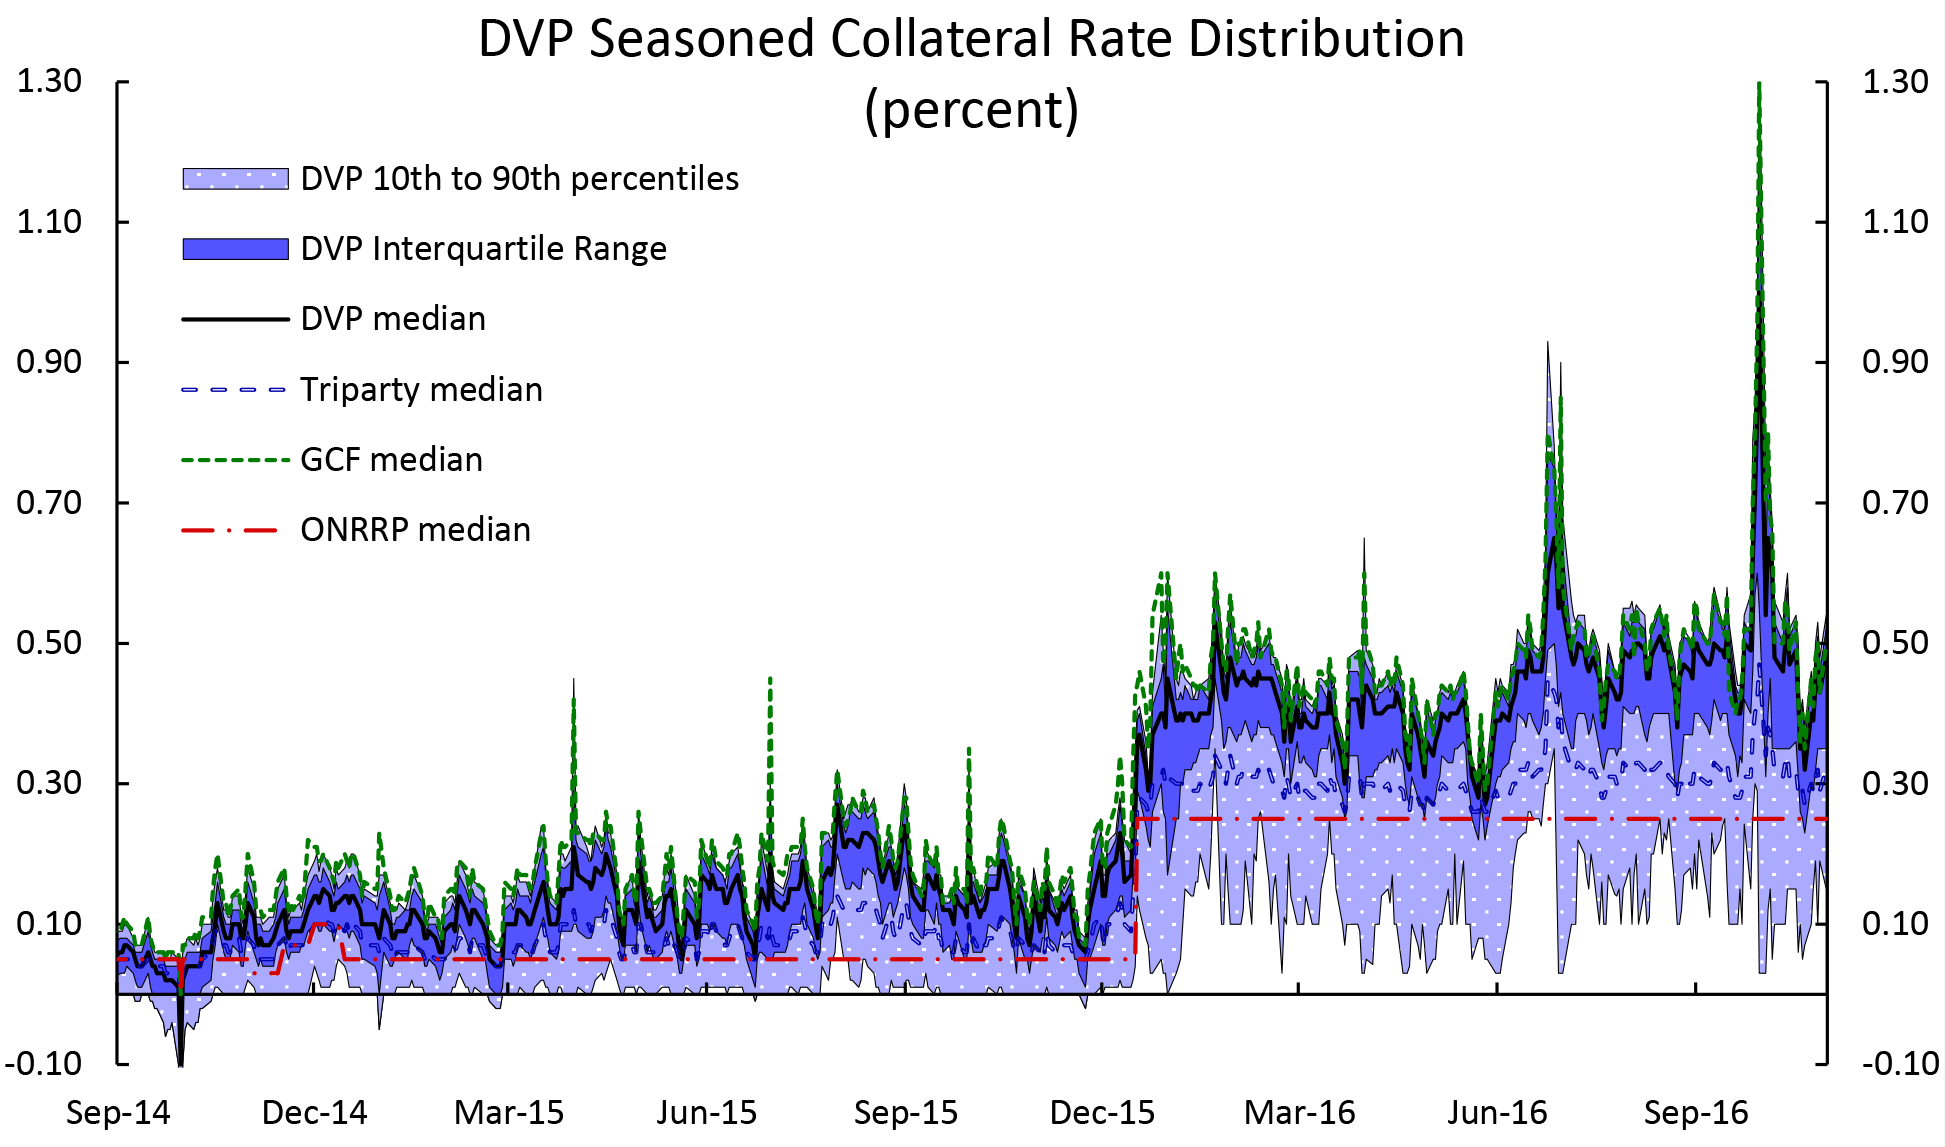 Figure 4: DVP Seasoned Collateral Rate Distribution. See accessible link for data description.